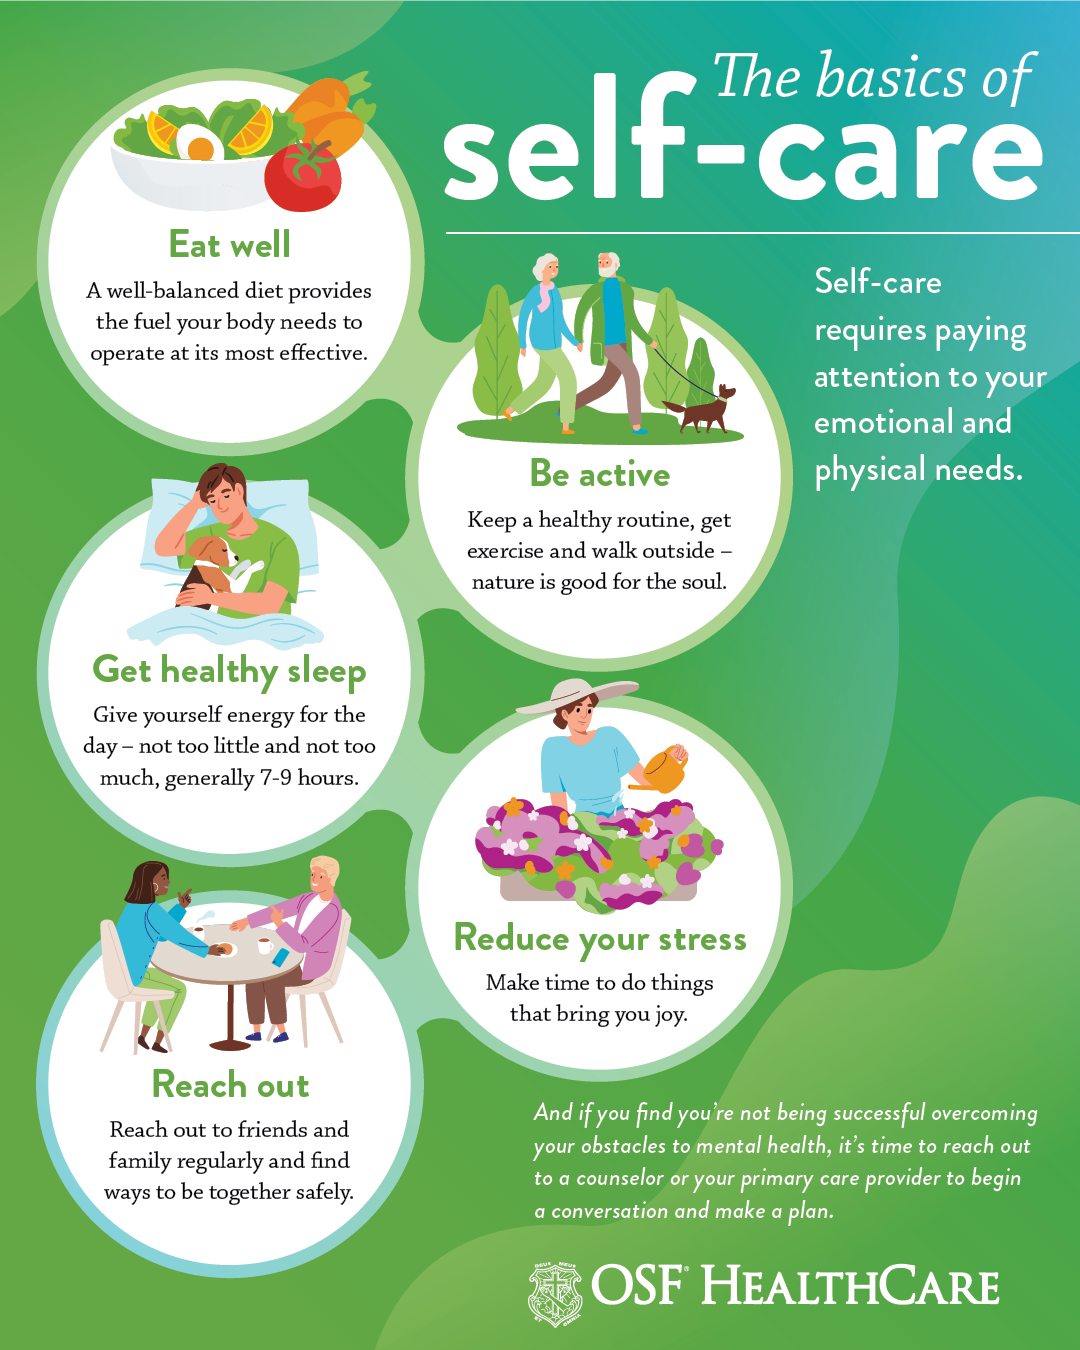 https://www.osfhealthcare.org/blog/wp-content/uploads/2021/12/Basics-of-Self-Care-Infographic_FIN.png